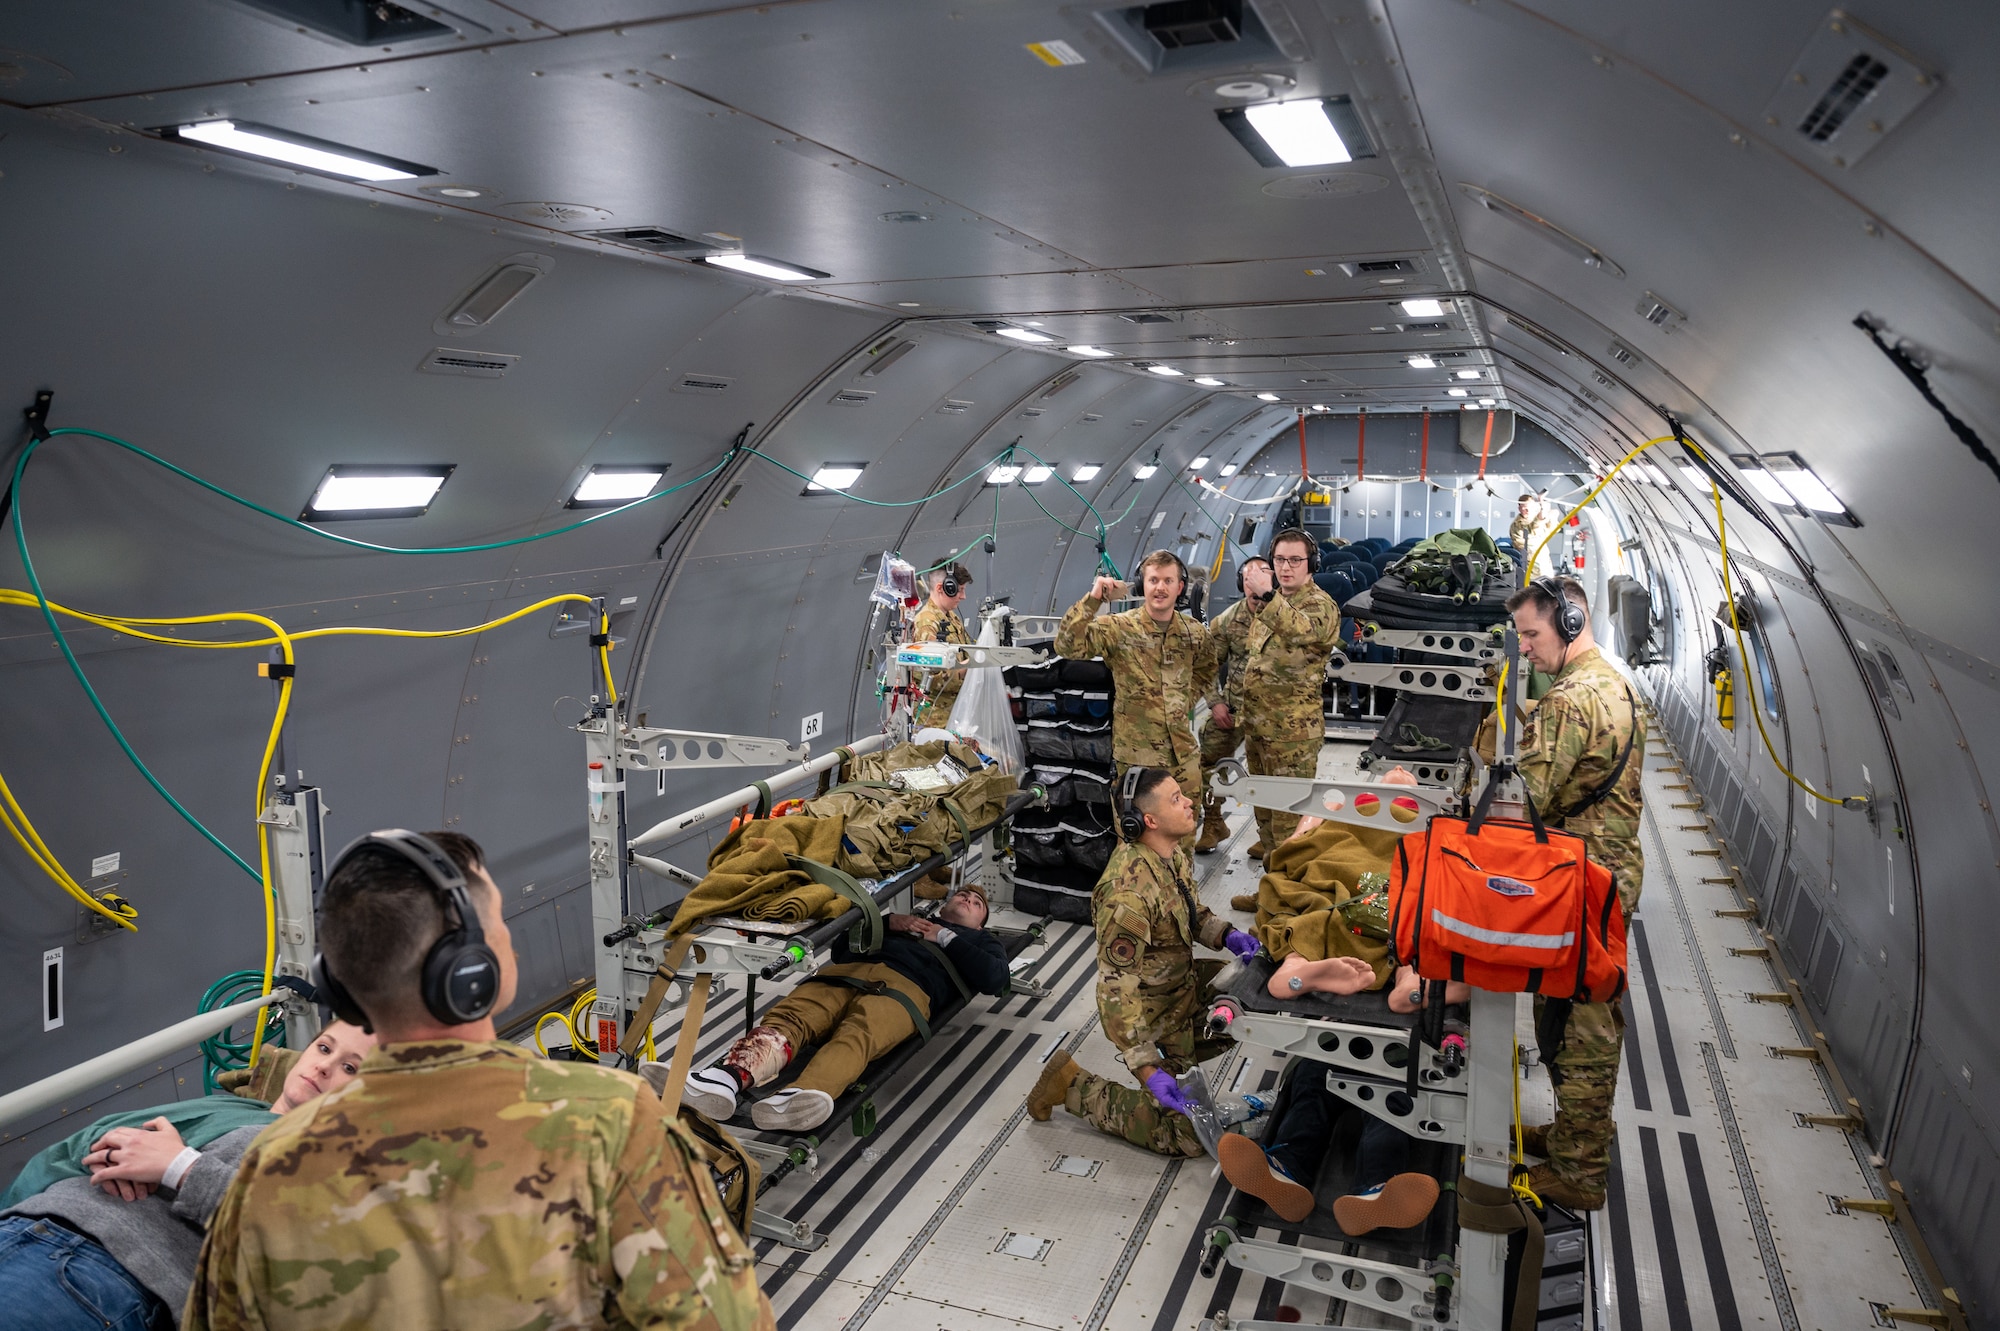 Members from the 375th Aeromedical Evacuation Squadron and 22nd Medical Group practice patient care on a flight in a KC-46A Pegasus during Exercise Lethal Pride March 29, 2023, over Kansas. Lethal Pride was a five-day exercise testing the 22nd Air Refueling Wing’s ability to launch, communicate with and recover aircraft in a contested environment with degraded communications. (U.S. Air Force photo by Senior Airman Zachary Willis)